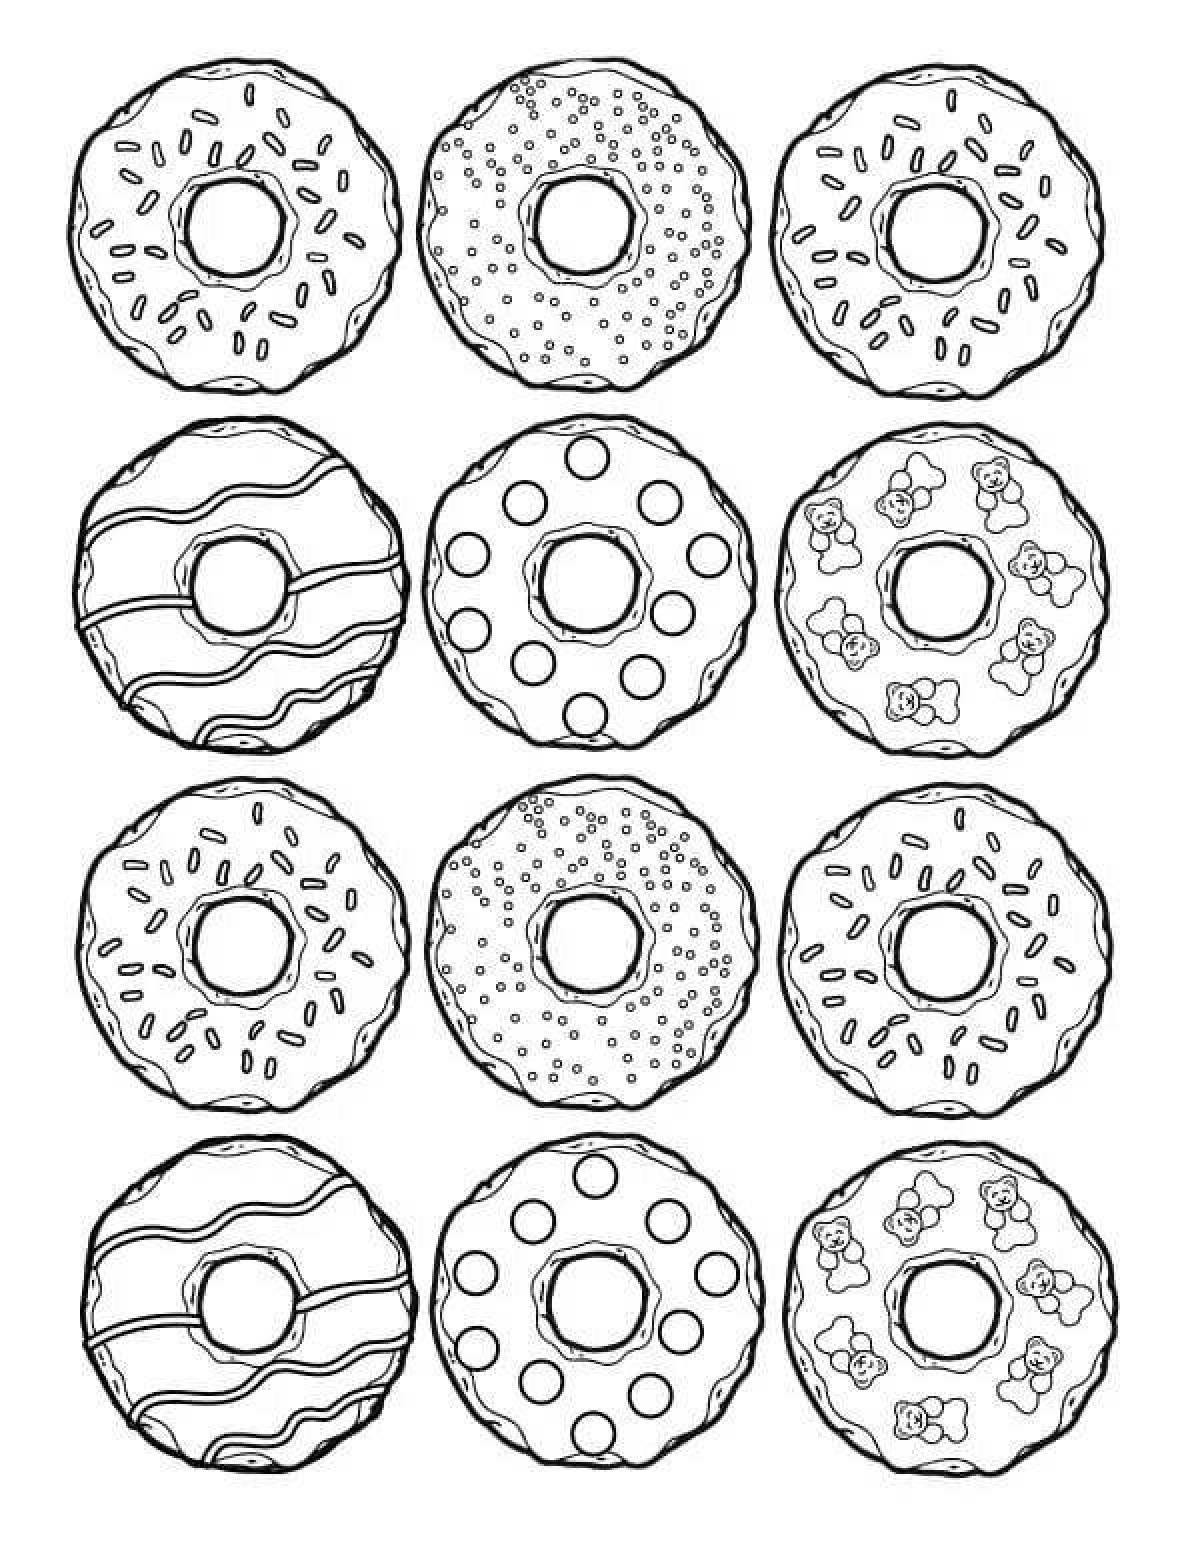 Wonderful donut coloring book for kids